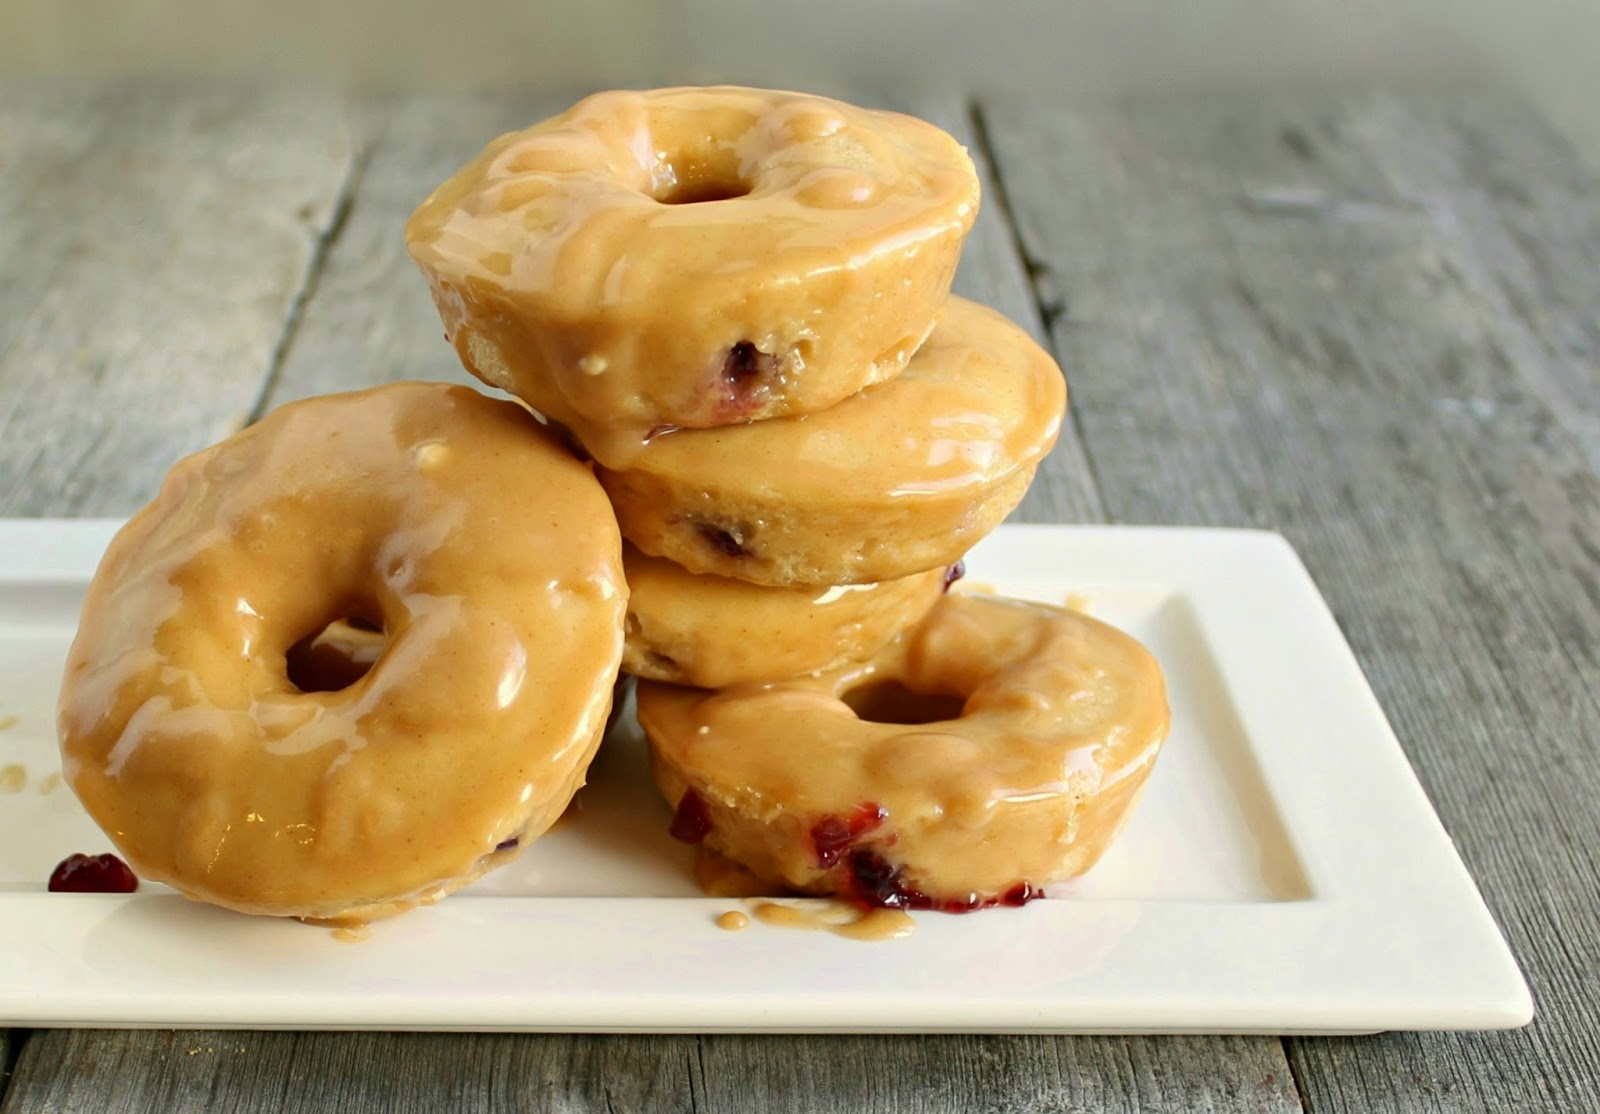 Baked Peanut Butter and Jelly Doughnuts